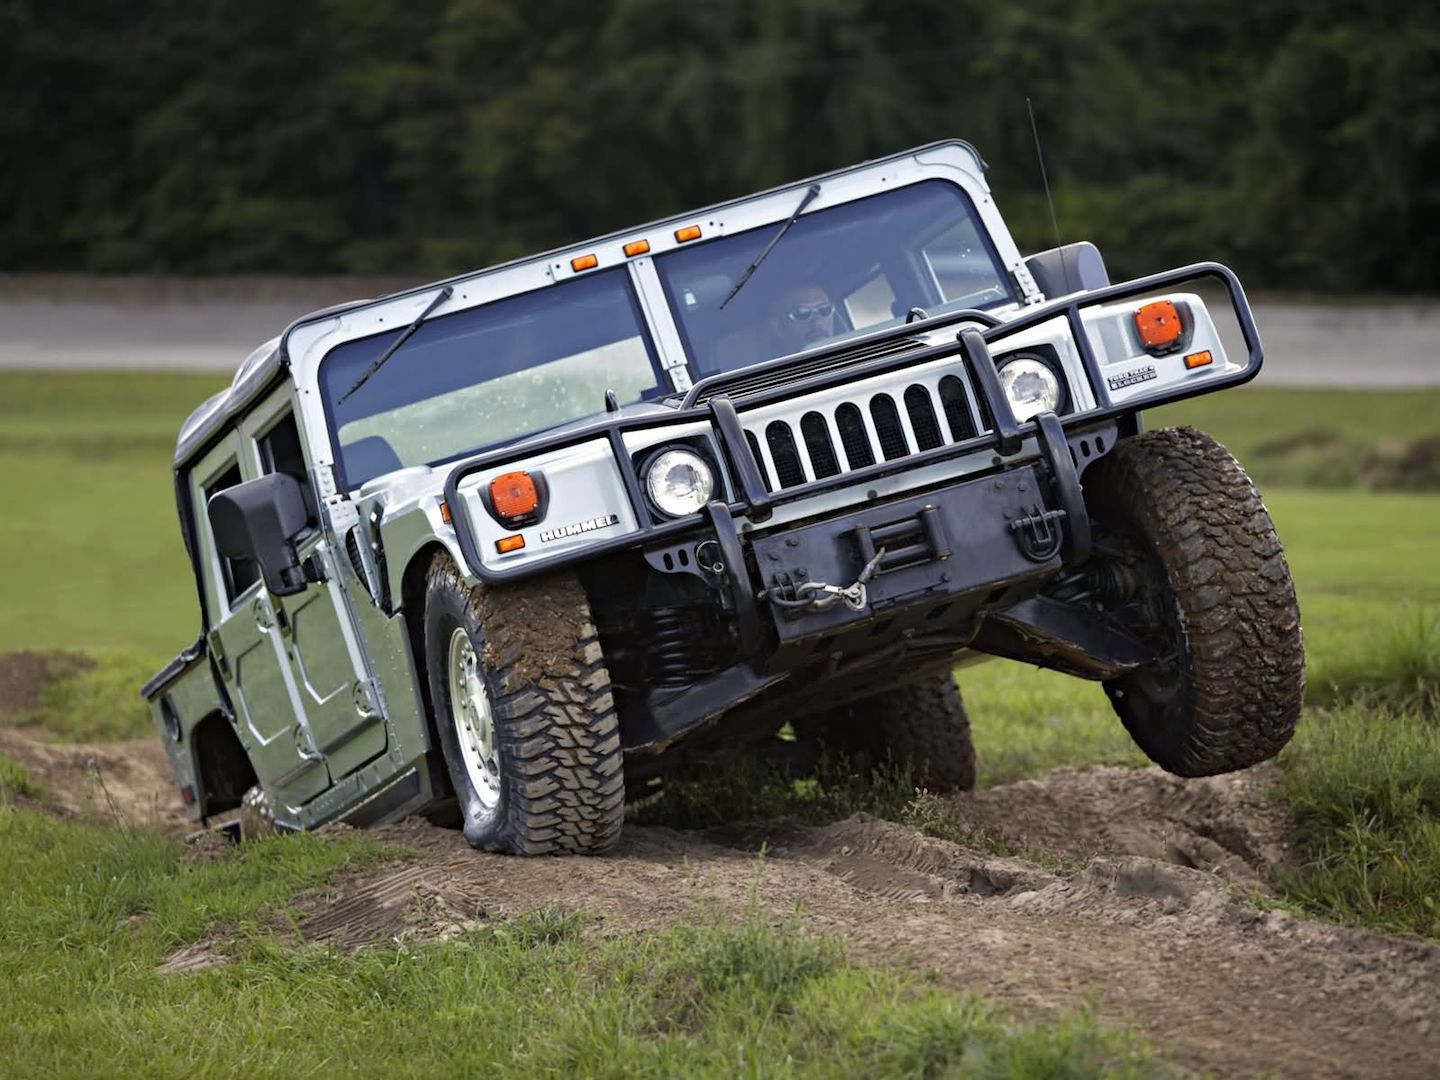 Learn all there is to know about the Hummer from this video | DriveMag Cars